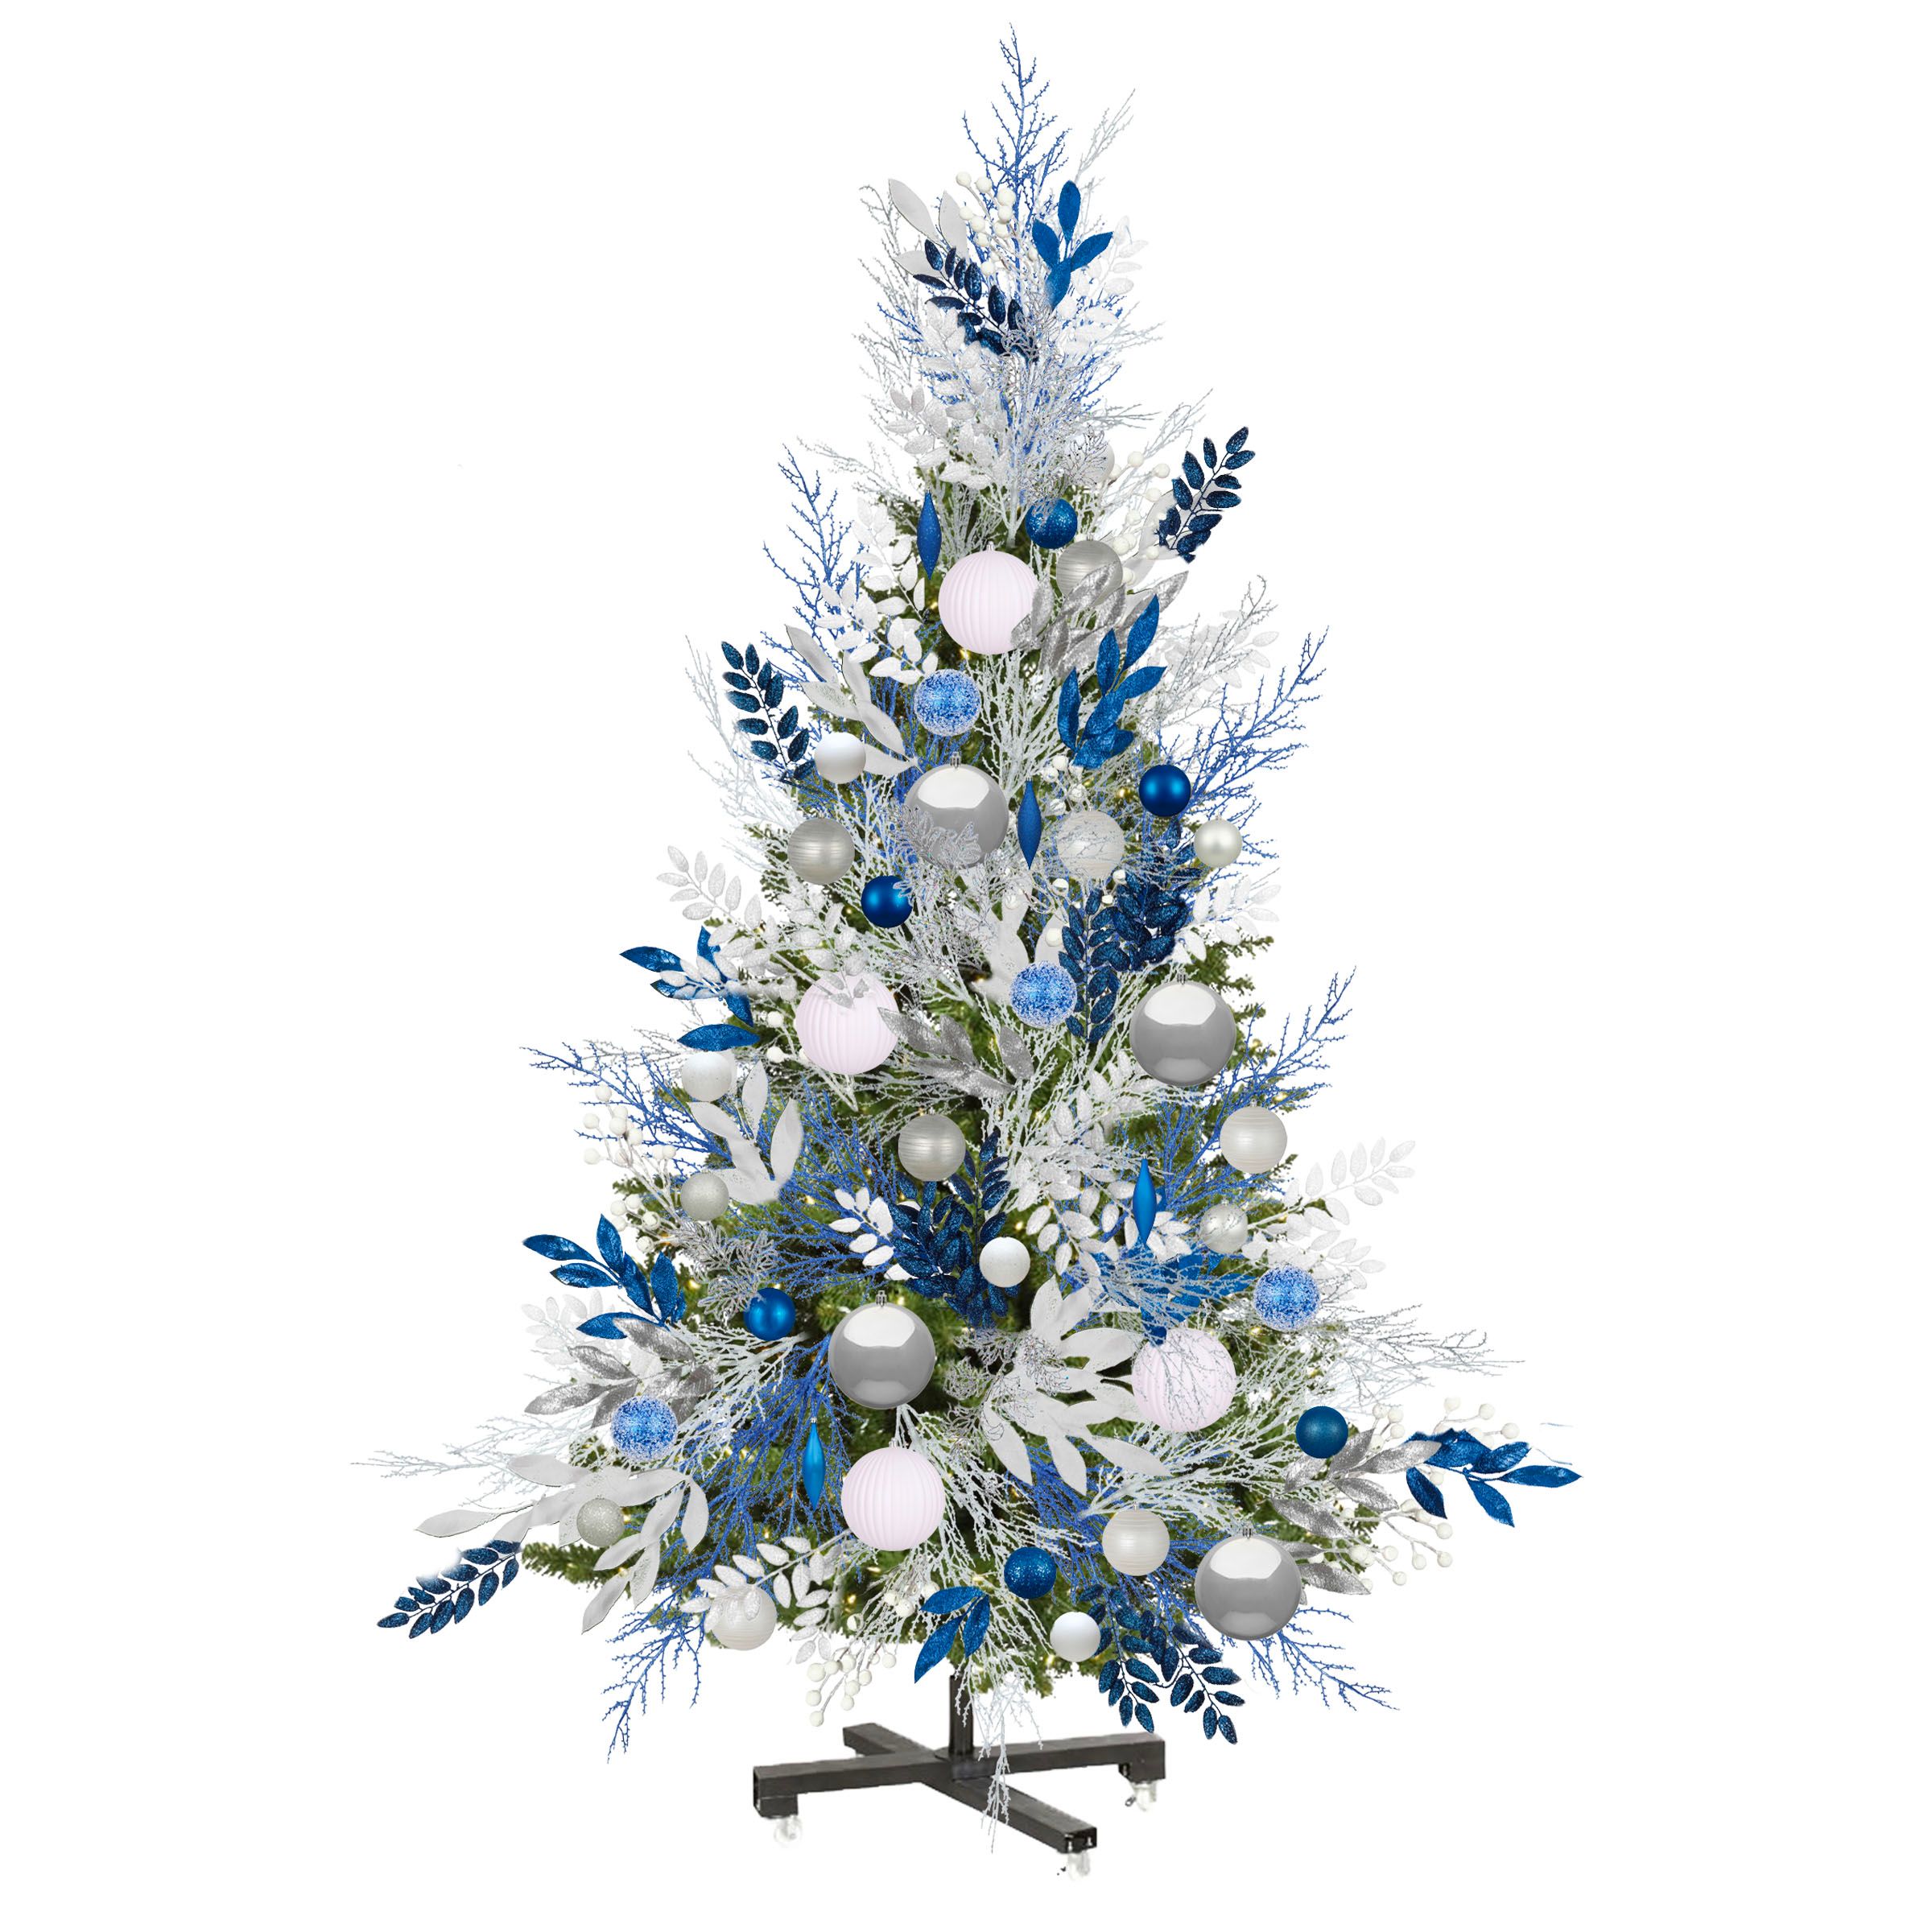 Winter Whimsy - Blue, silver, and white Christmas tree